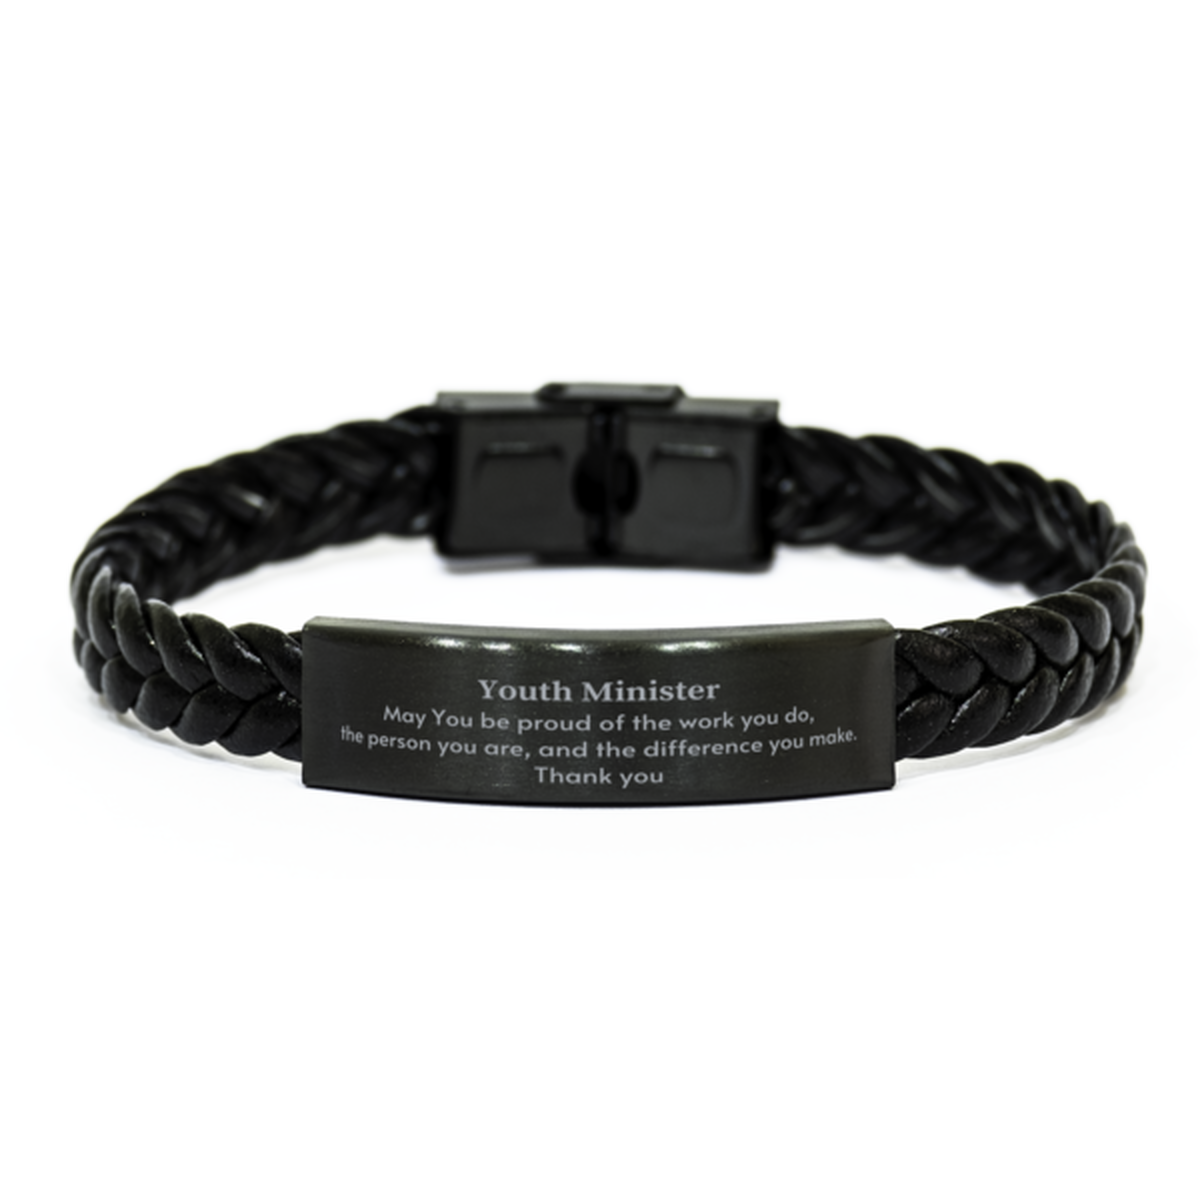 Heartwarming Braided Leather Bracelet Retirement Coworkers Gifts for Youth Minister, Youth Minister May You be proud of the work you do, the person you are Gifts for Boss Men Women Friends